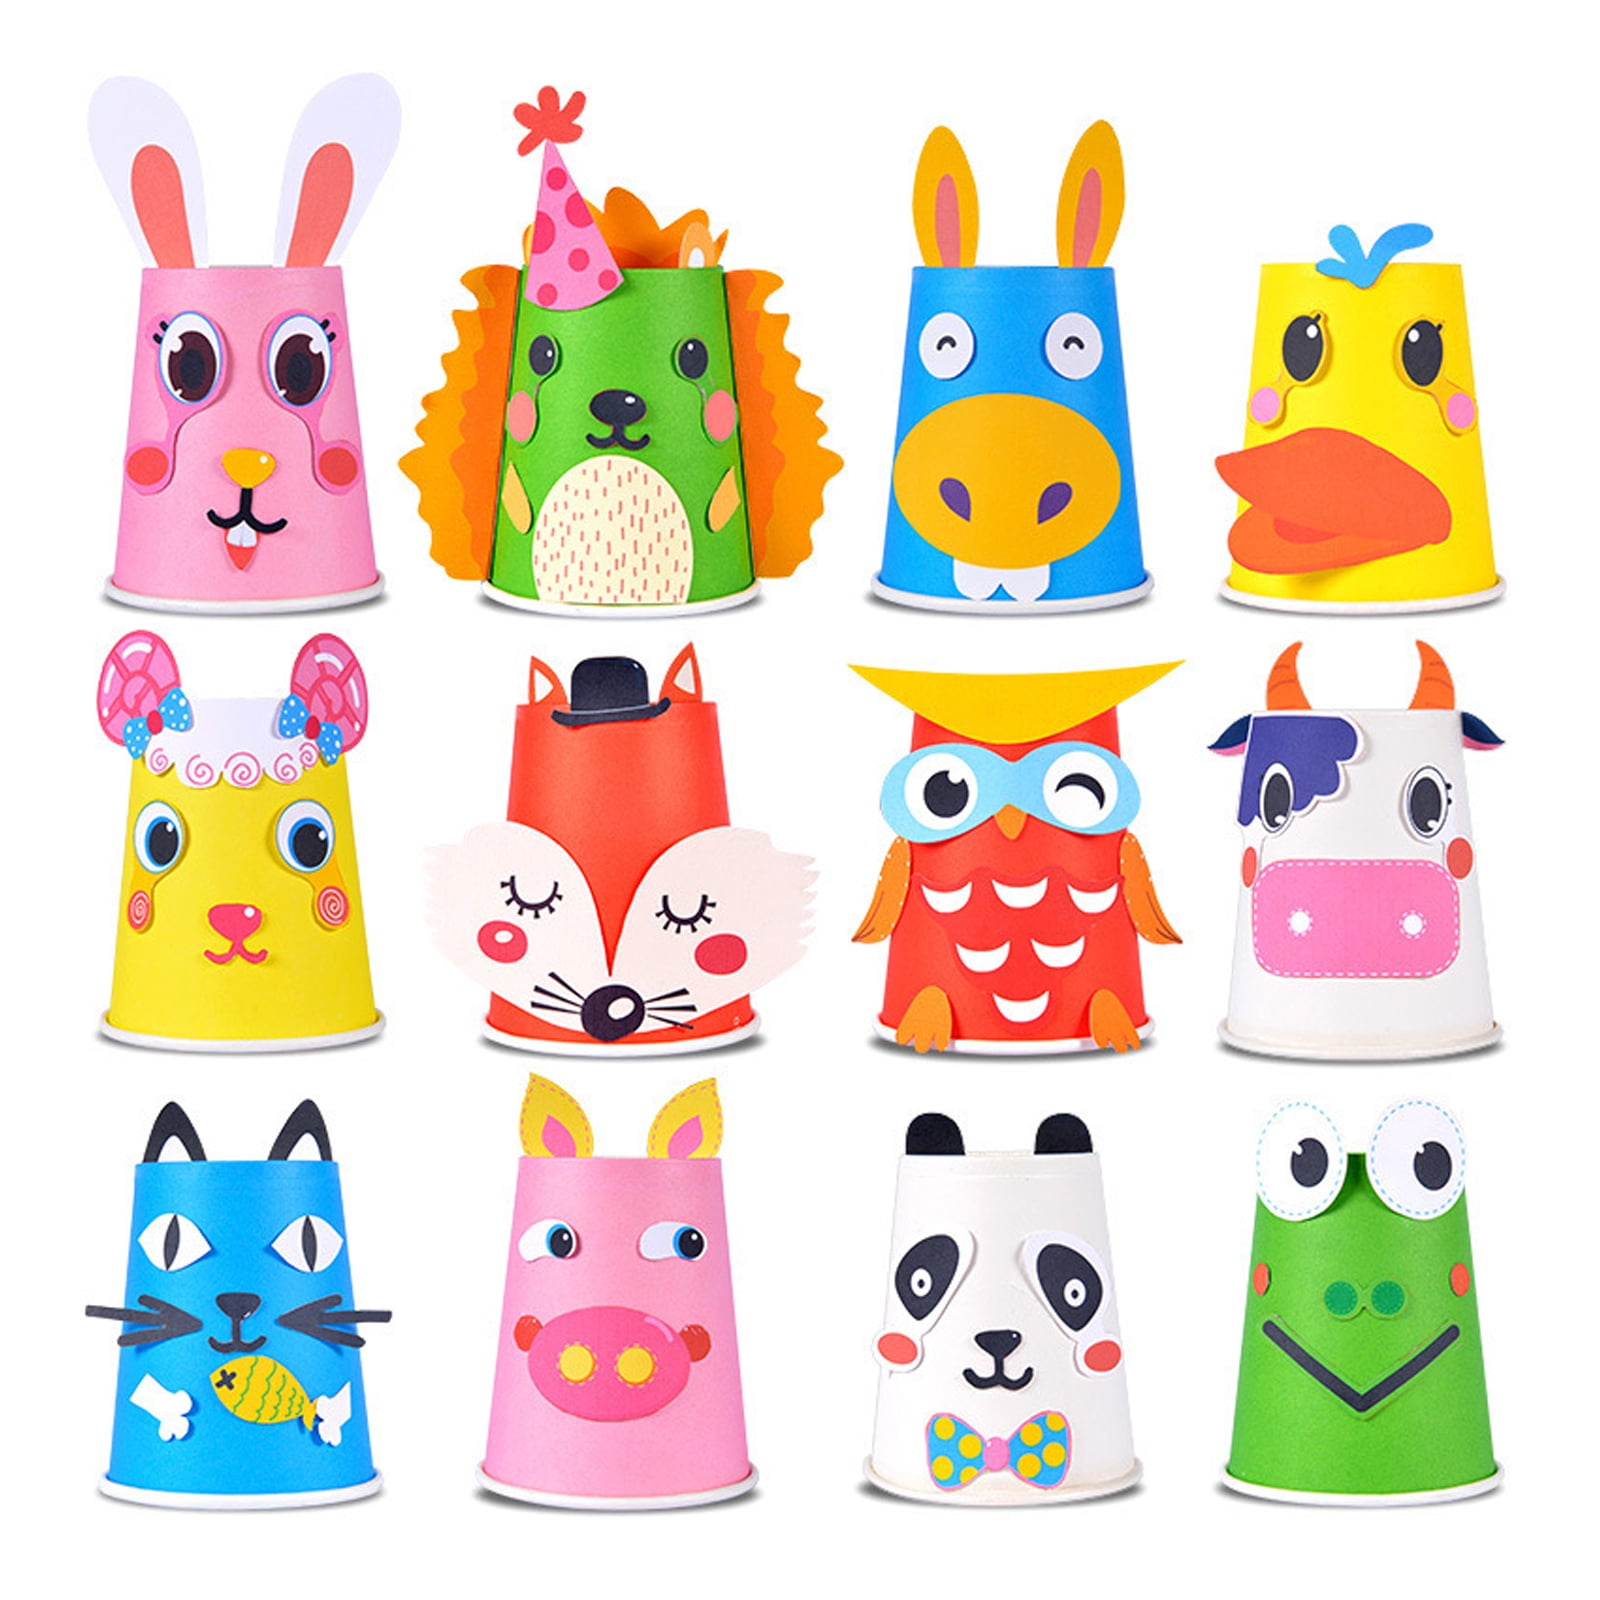 Qyeahkj 243pcs Toddlers Arts and Craft Kit for Kids Preschoolers Ages 2-4,  18 Set Easy Crafts for Kids Ages 3-5, Animal Craft Set Includes Supplies